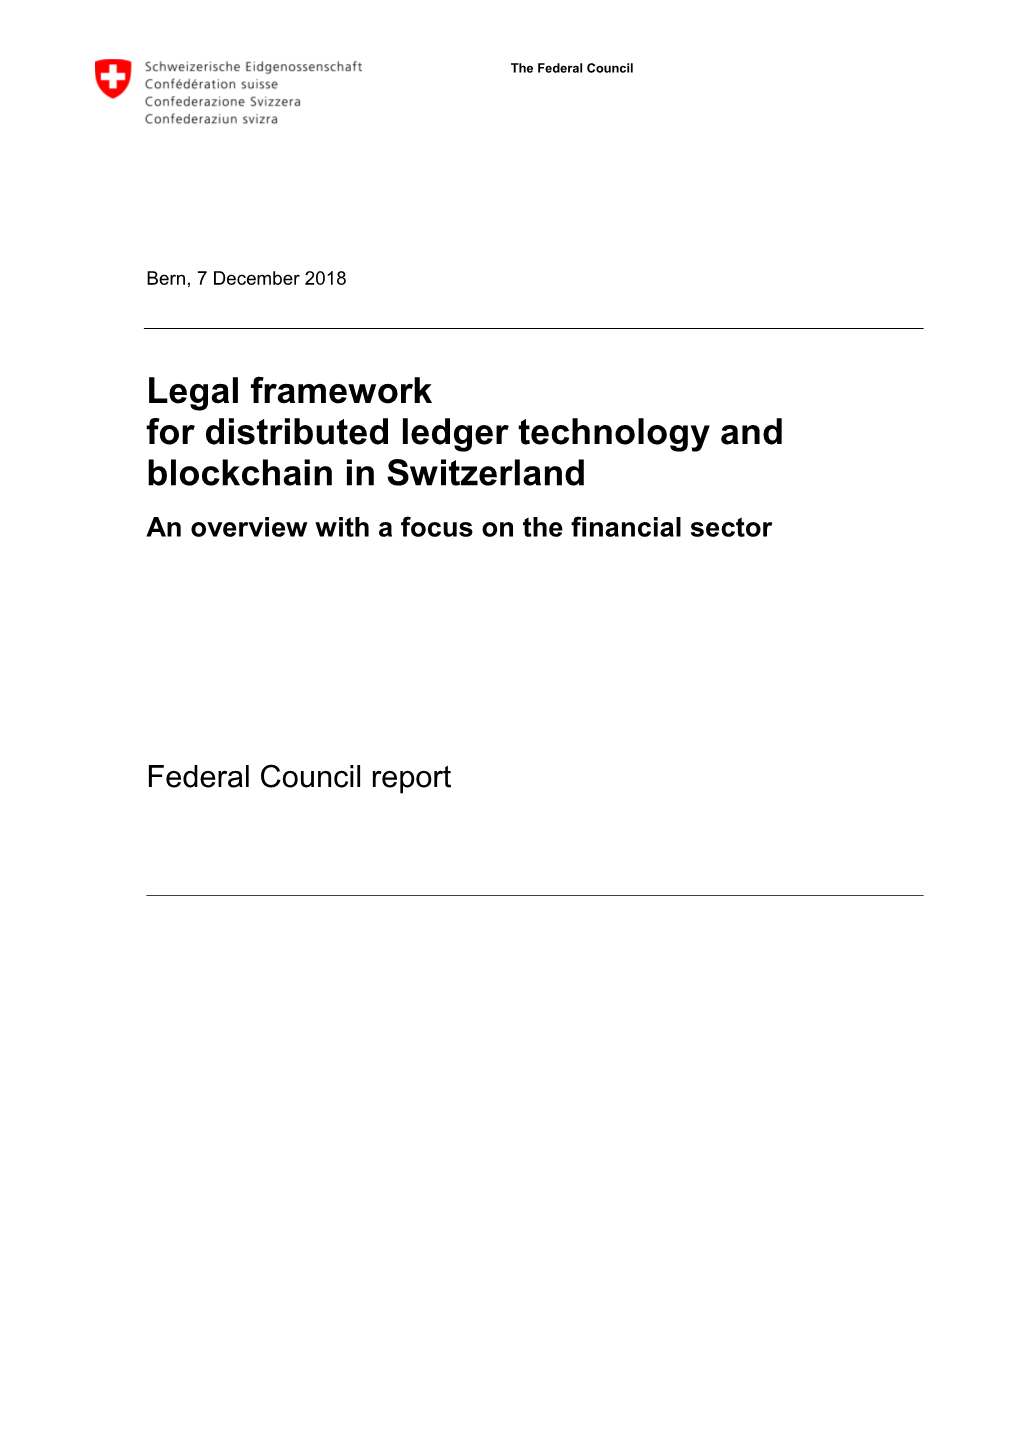 Legal Framework for Distributed Ledger Technology and Blockchain in Switzerland an Overview with a Focus on the Financial Sector